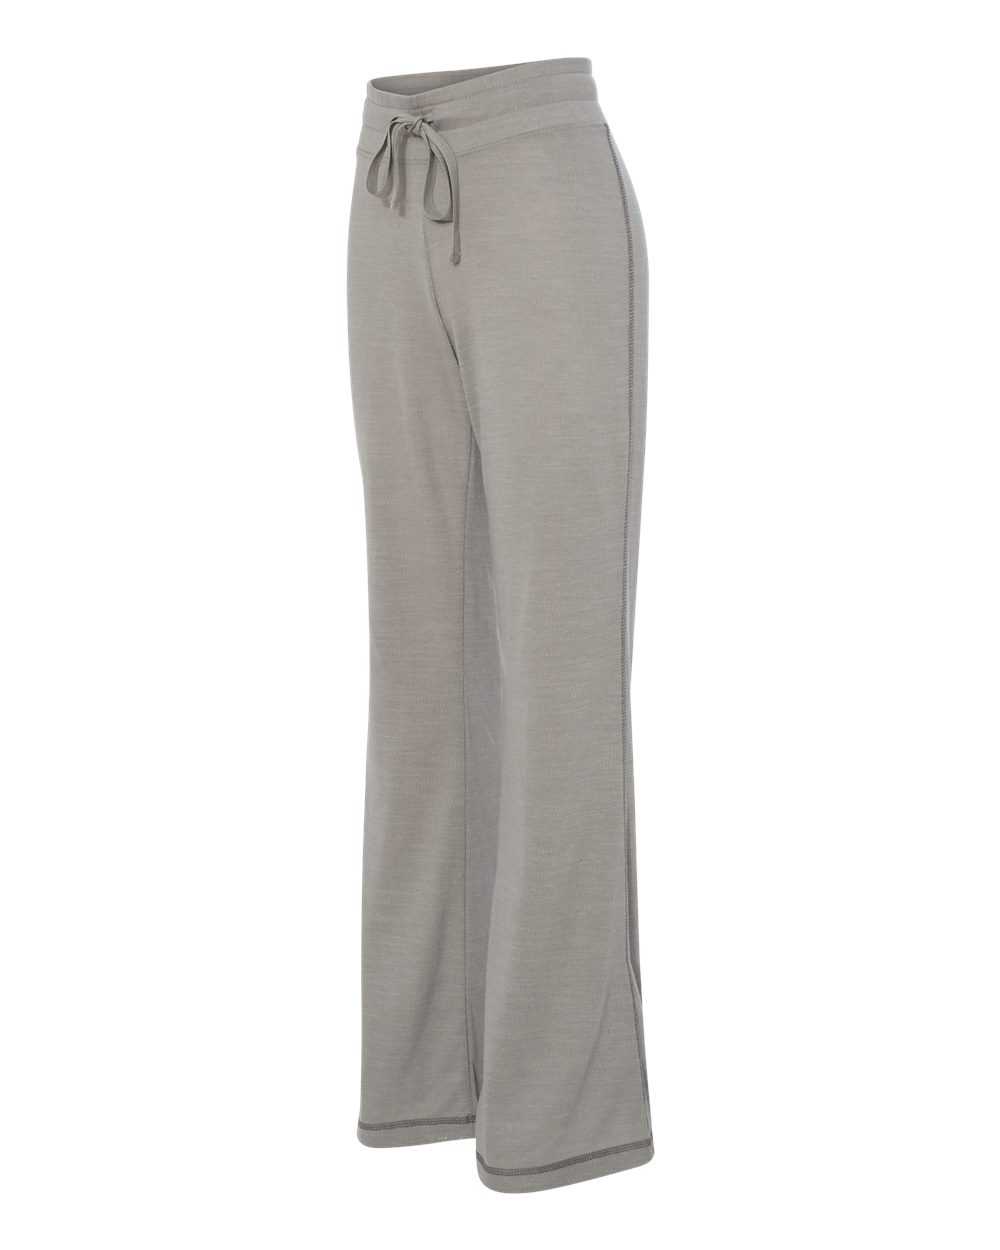 Boxercraft R10 - Women's French Terry Comfort Pants